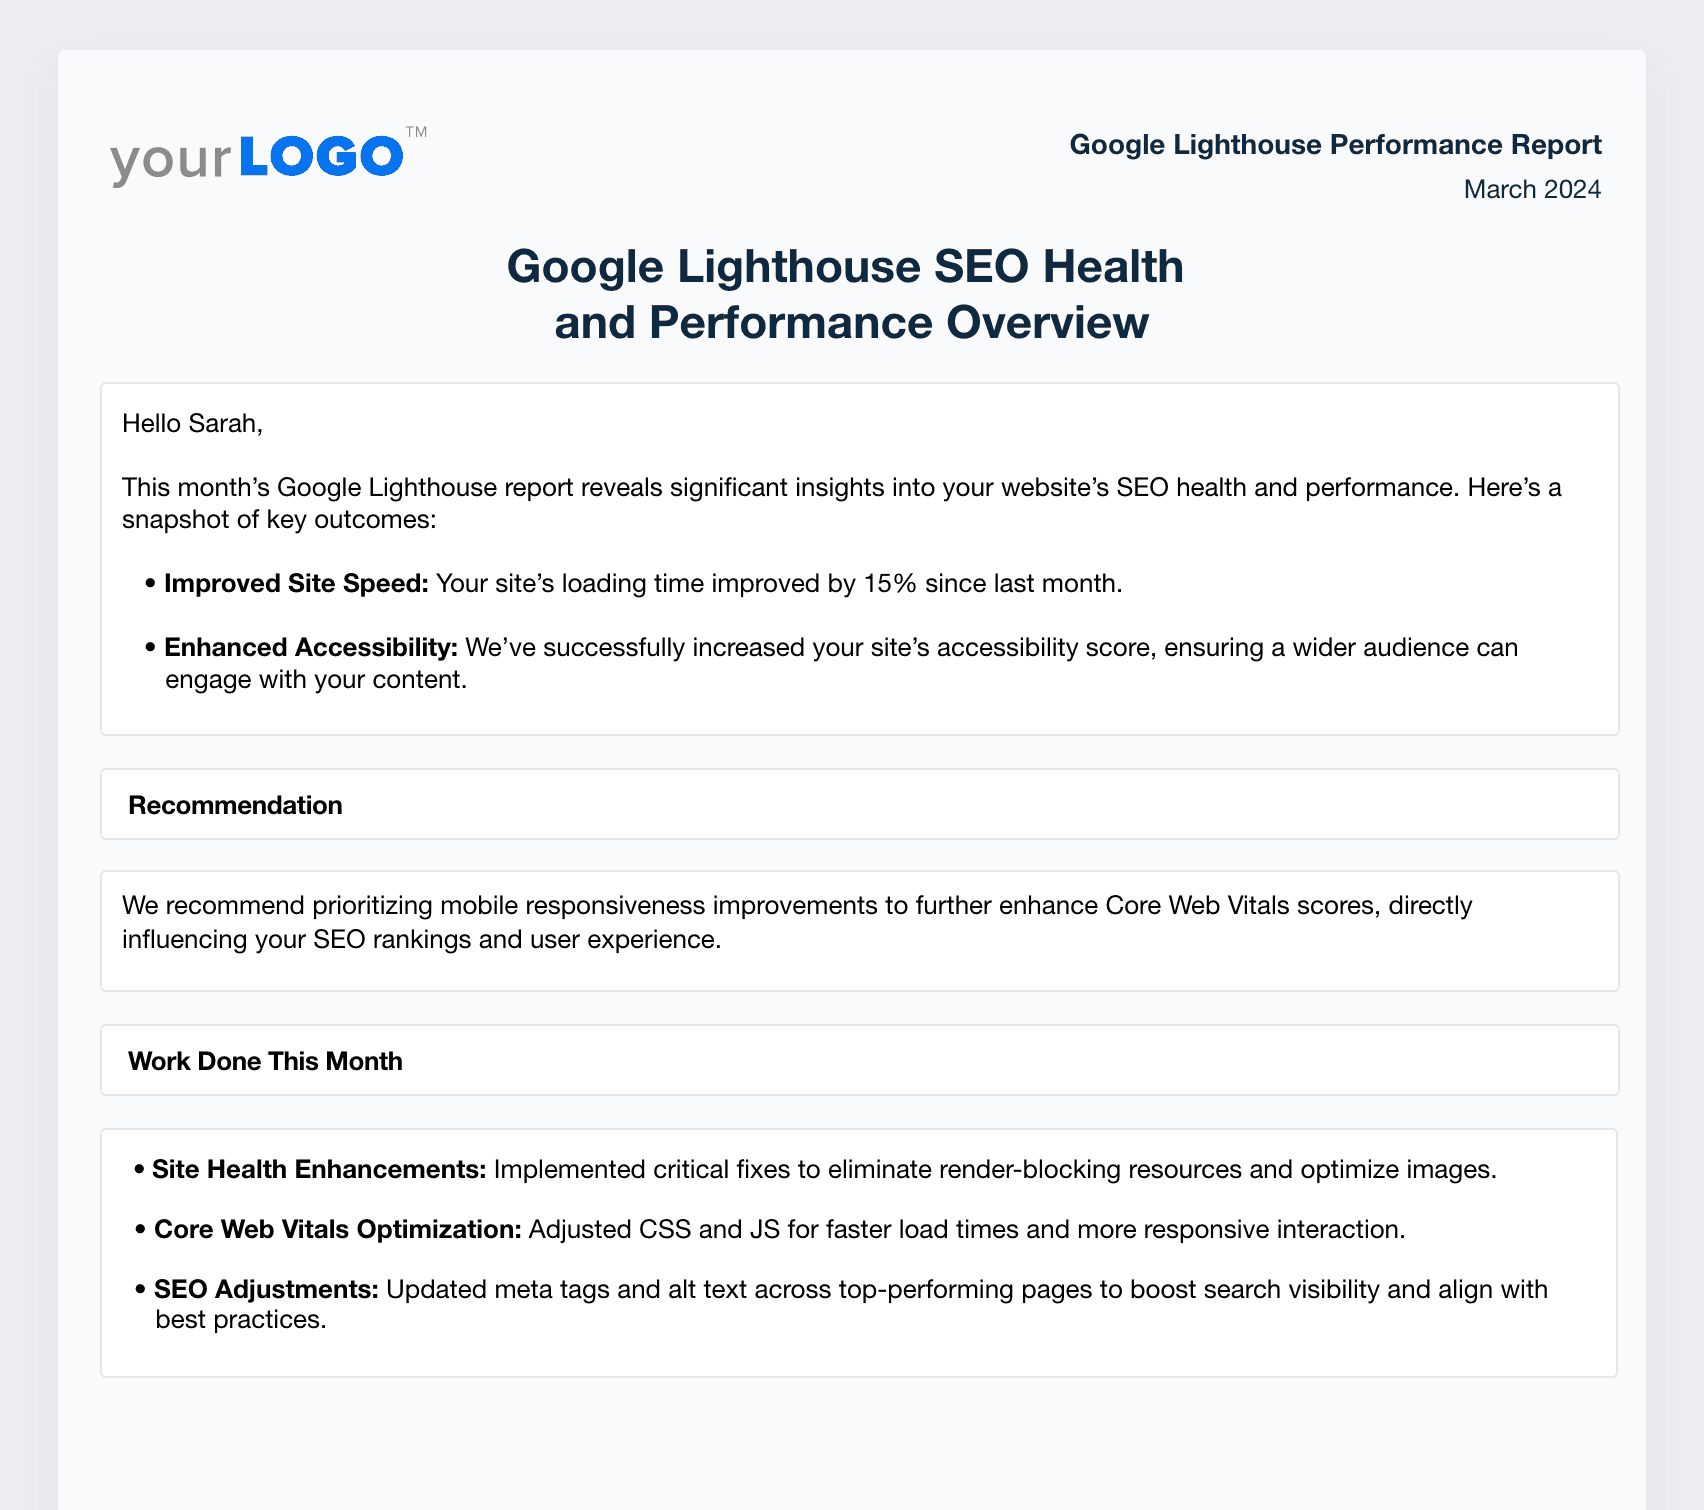 An example of a Google Lighthouse Monthly Report Summary